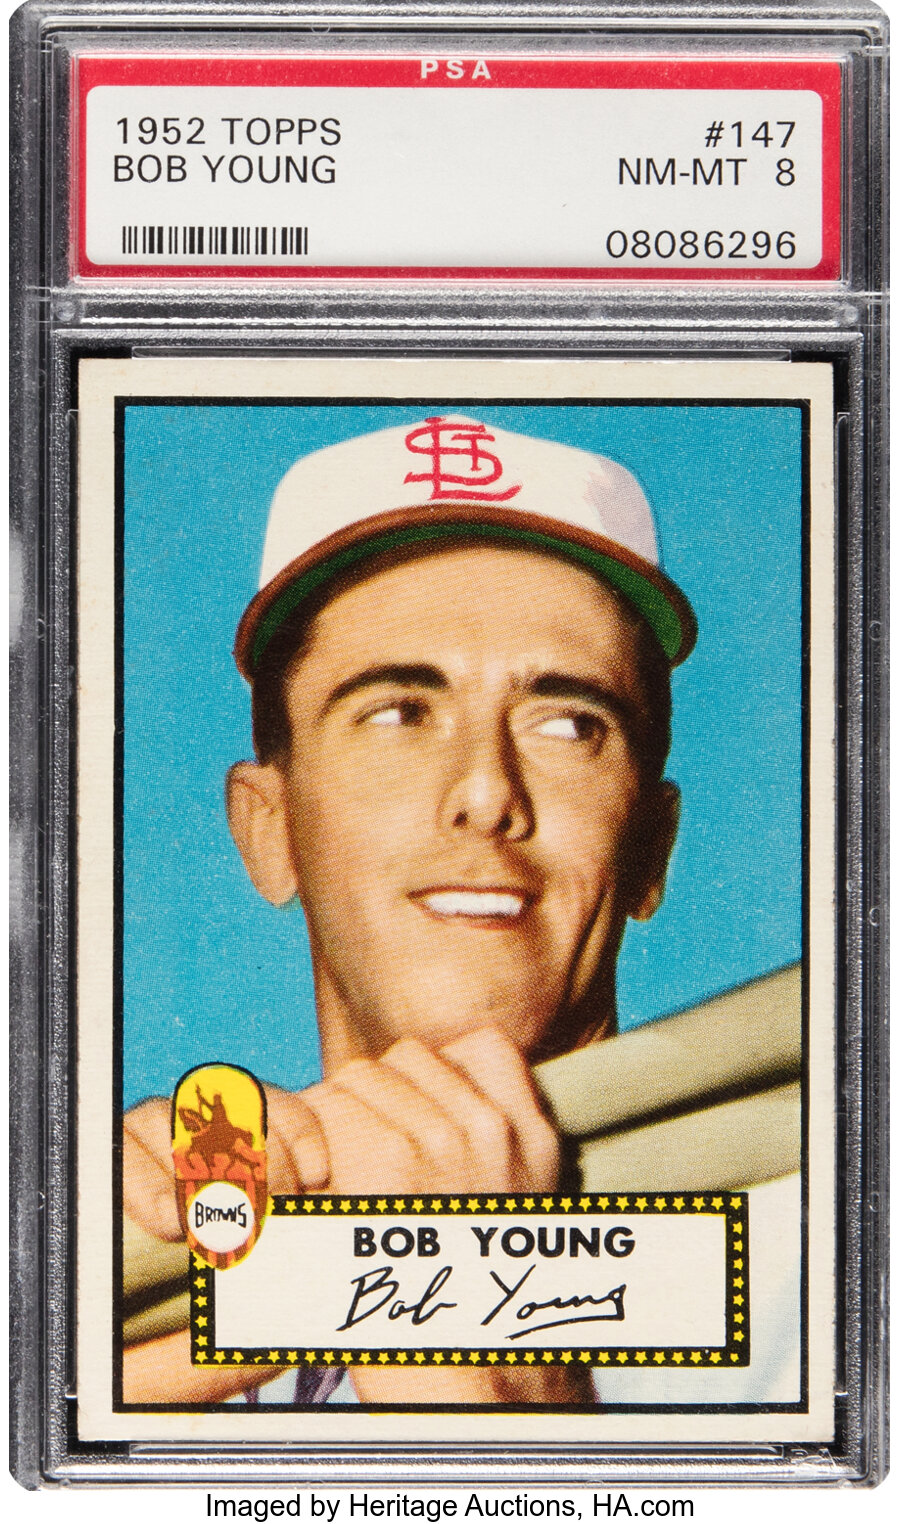 1952 Topps Bob Young Rookie #147 PSA NM-MT 8